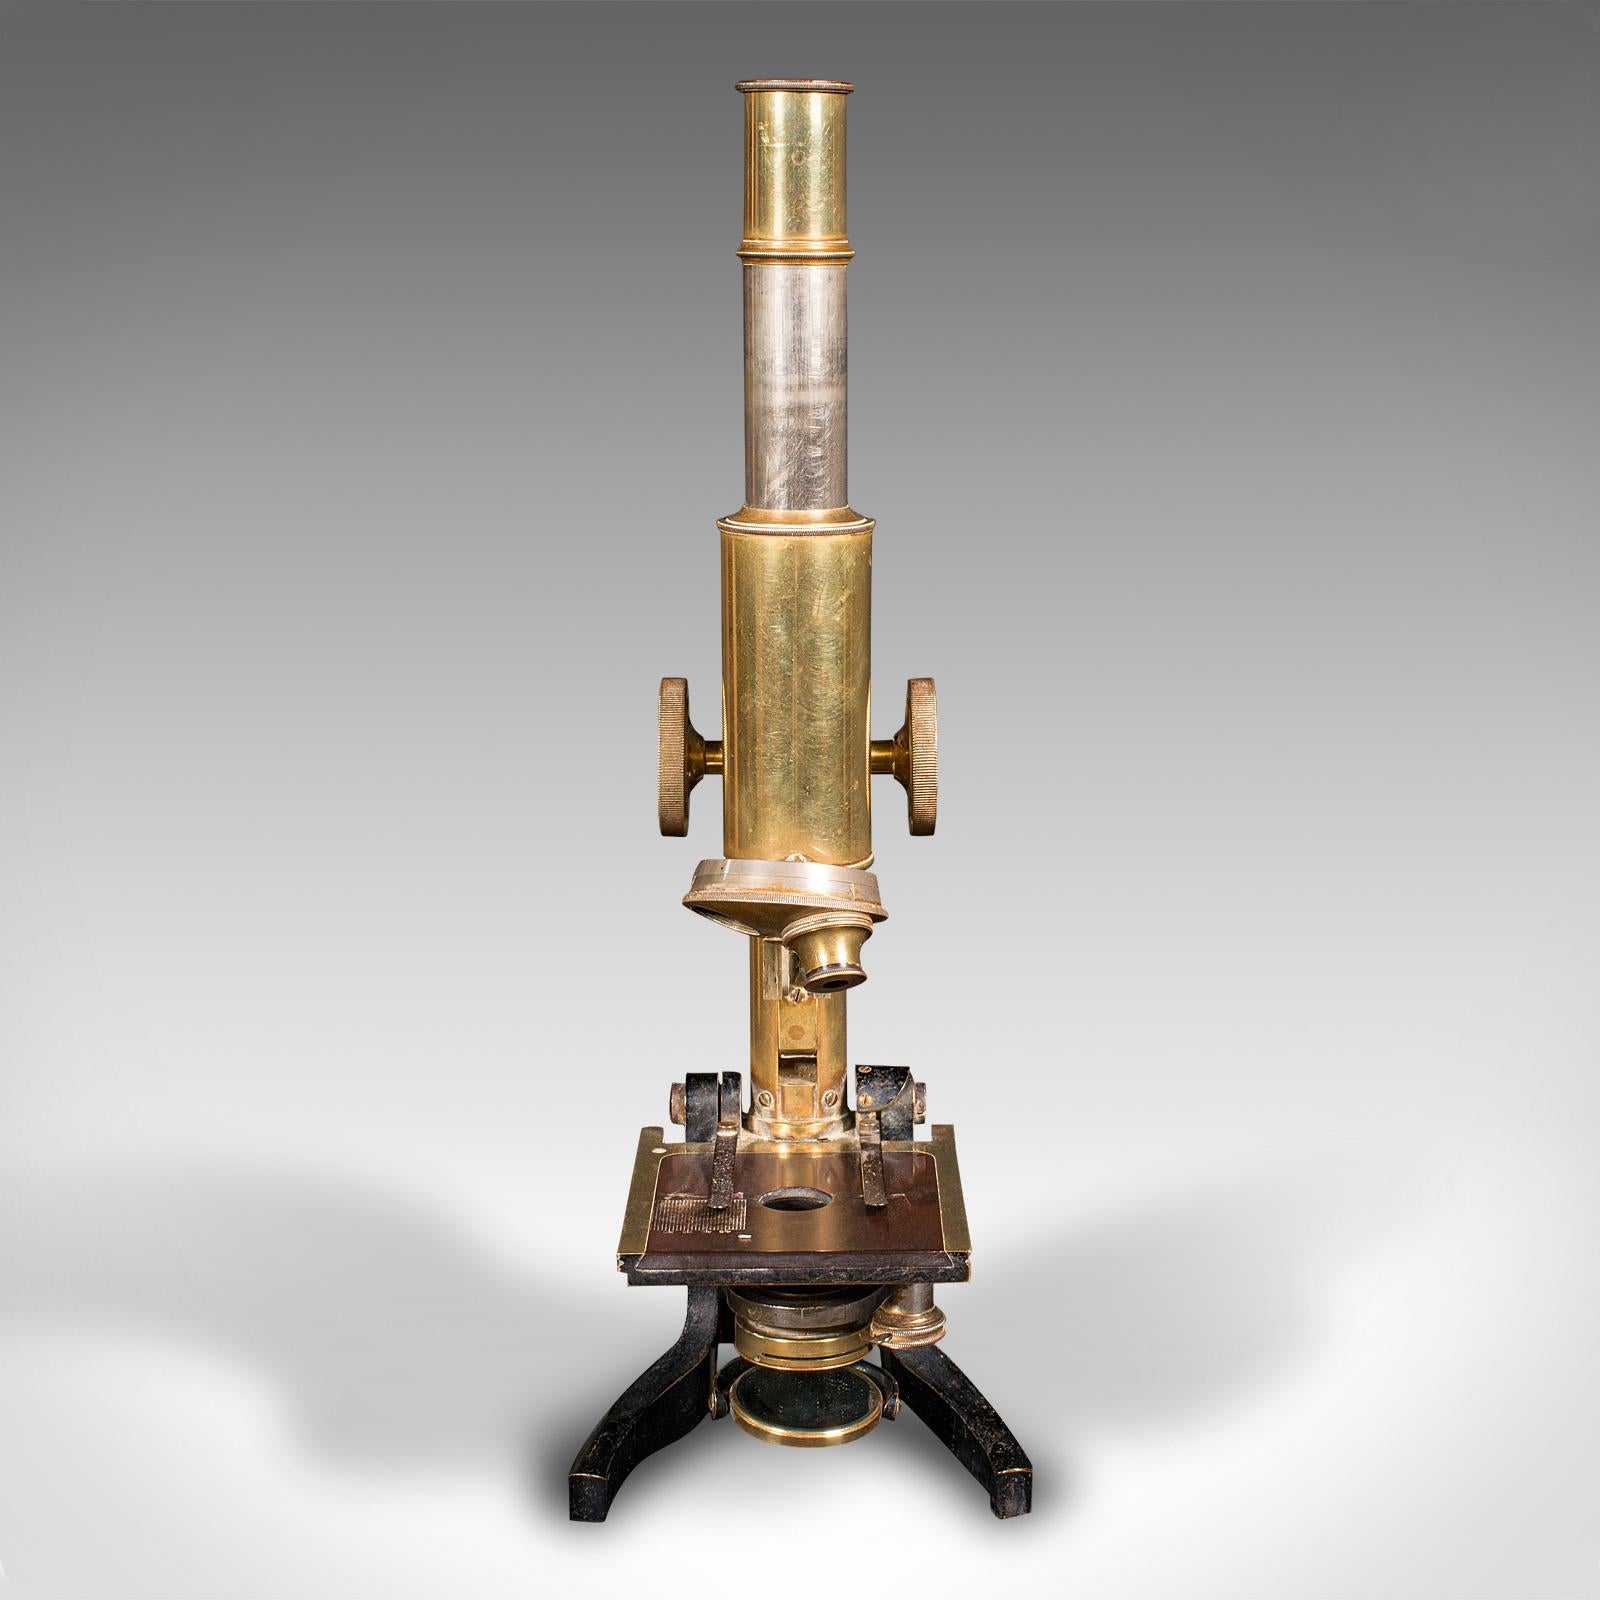 who invented the first microscope